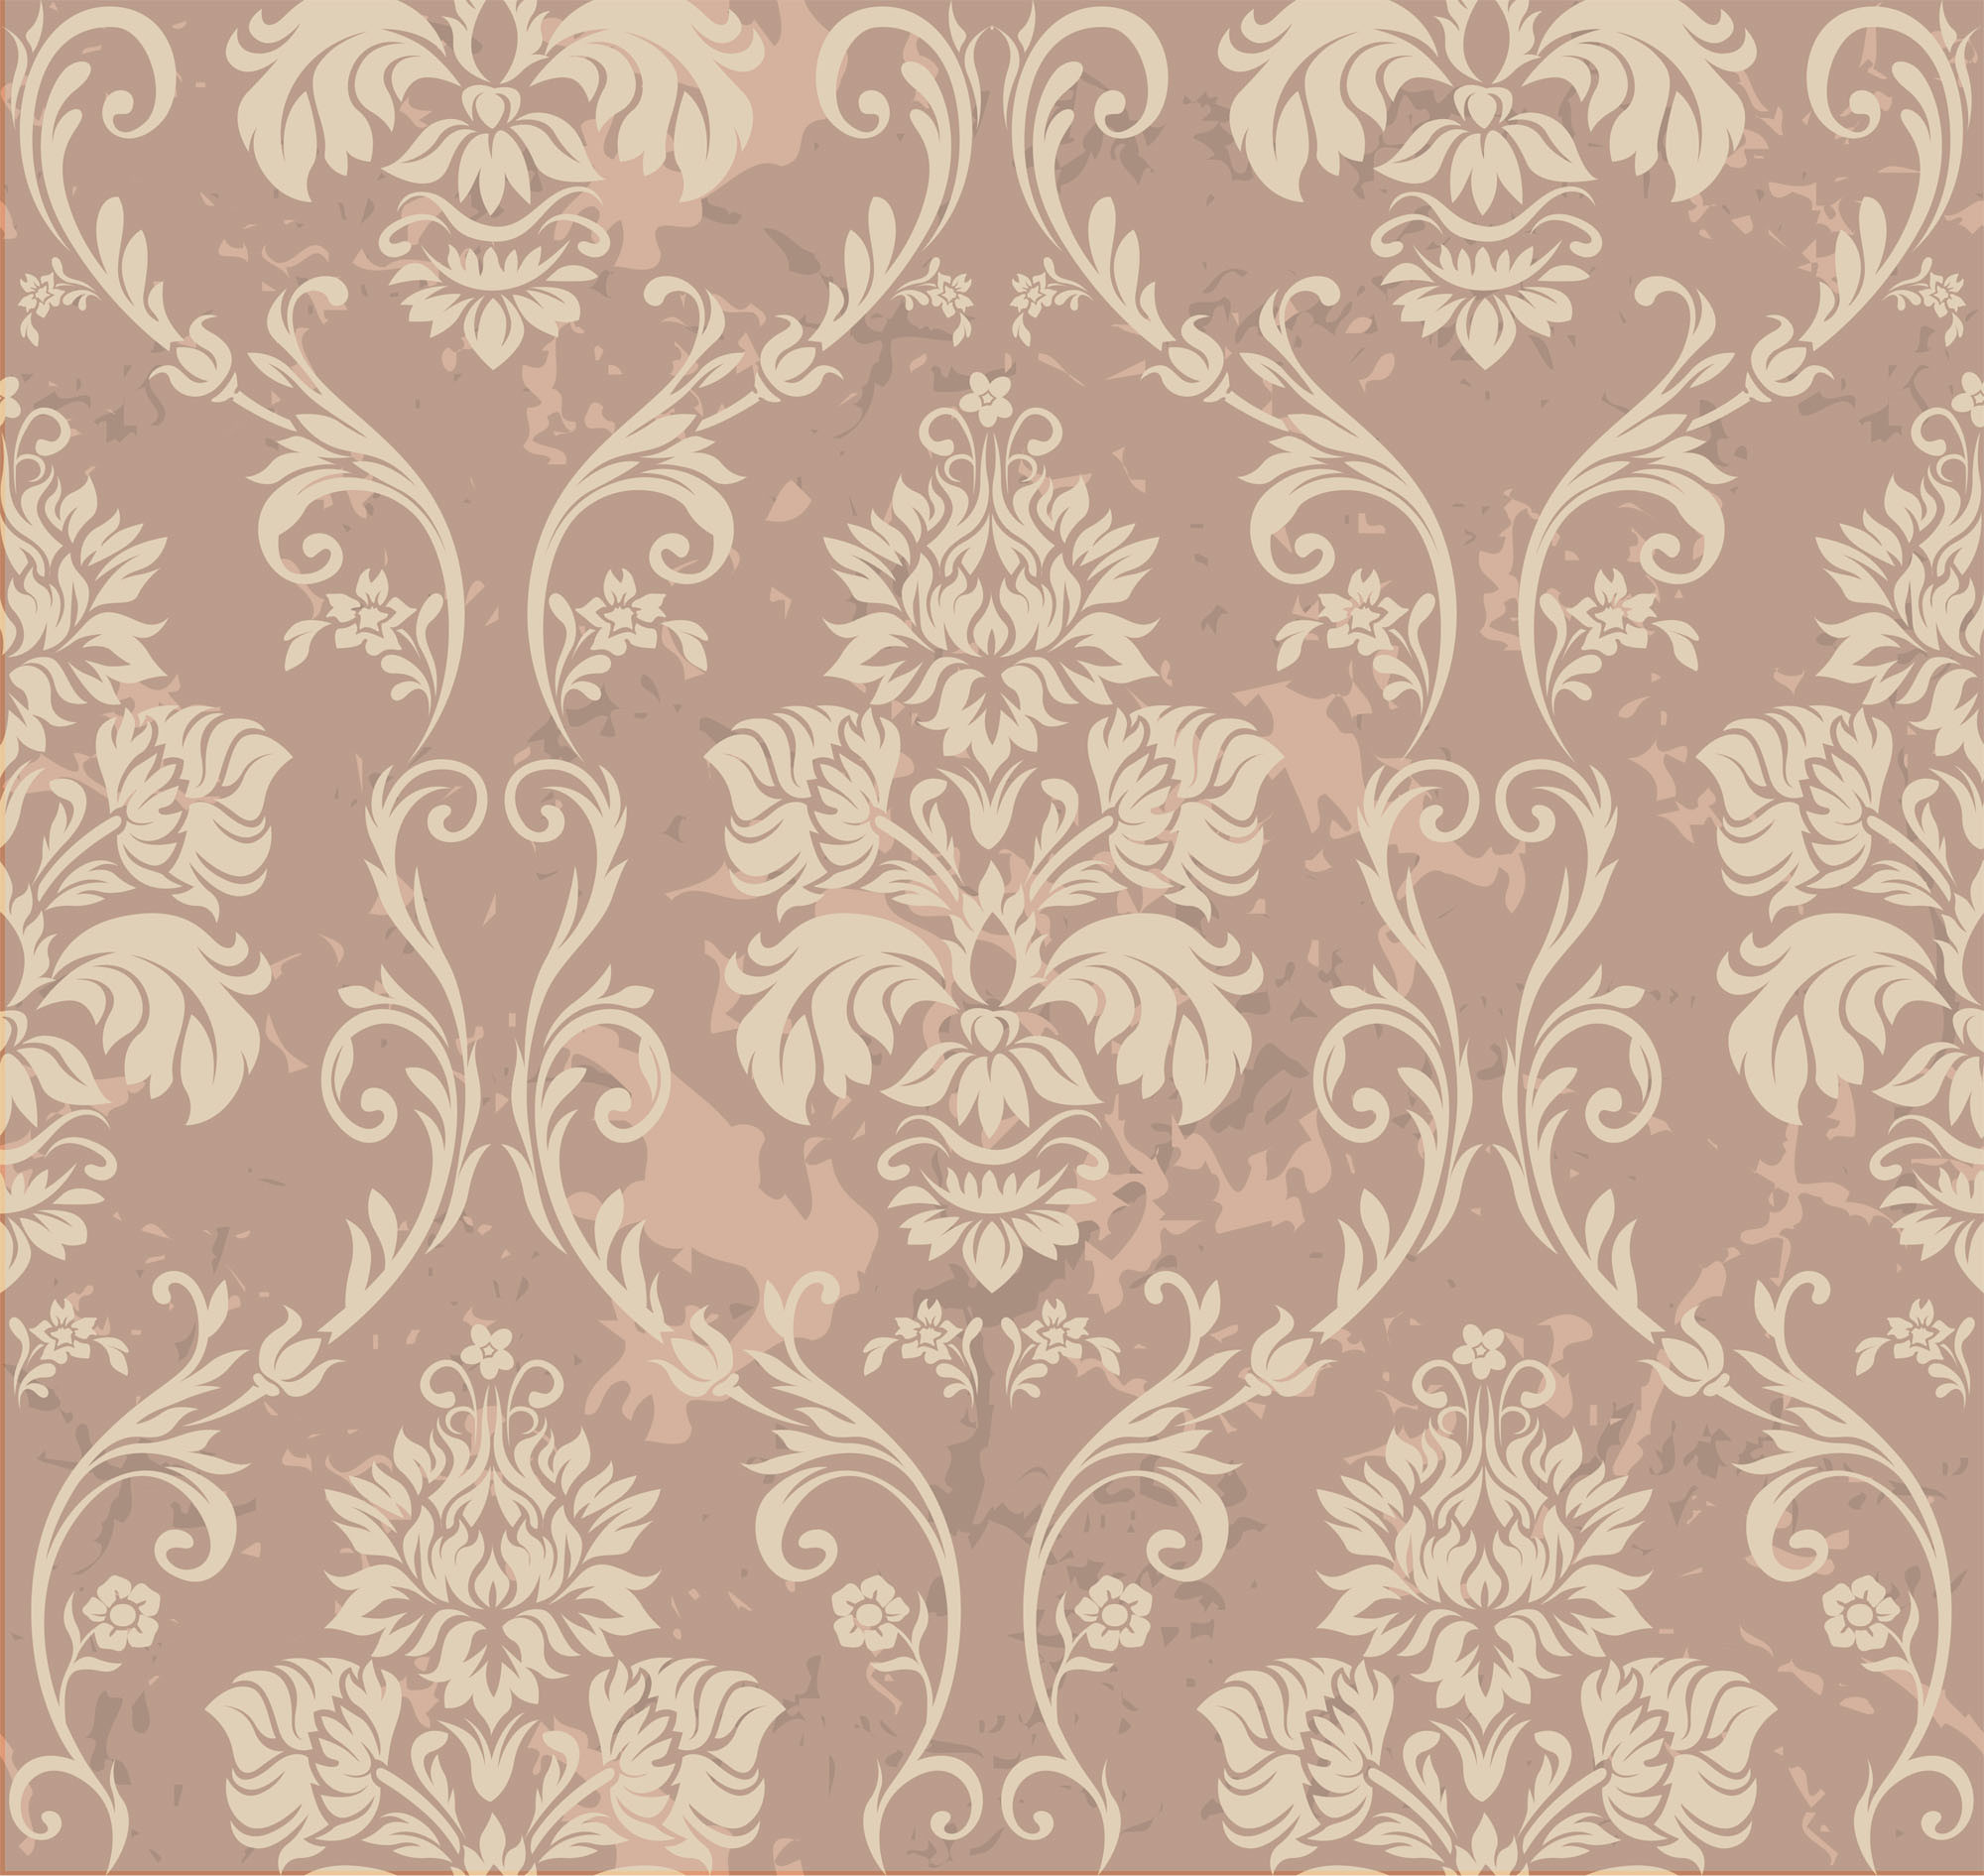 Old Edwardian wallpaper styles  home decor plus 40 real paper samples  from the early 1900s  Click Americana  Wallpaper samples Antique  wallpaper Victorian wallpaper